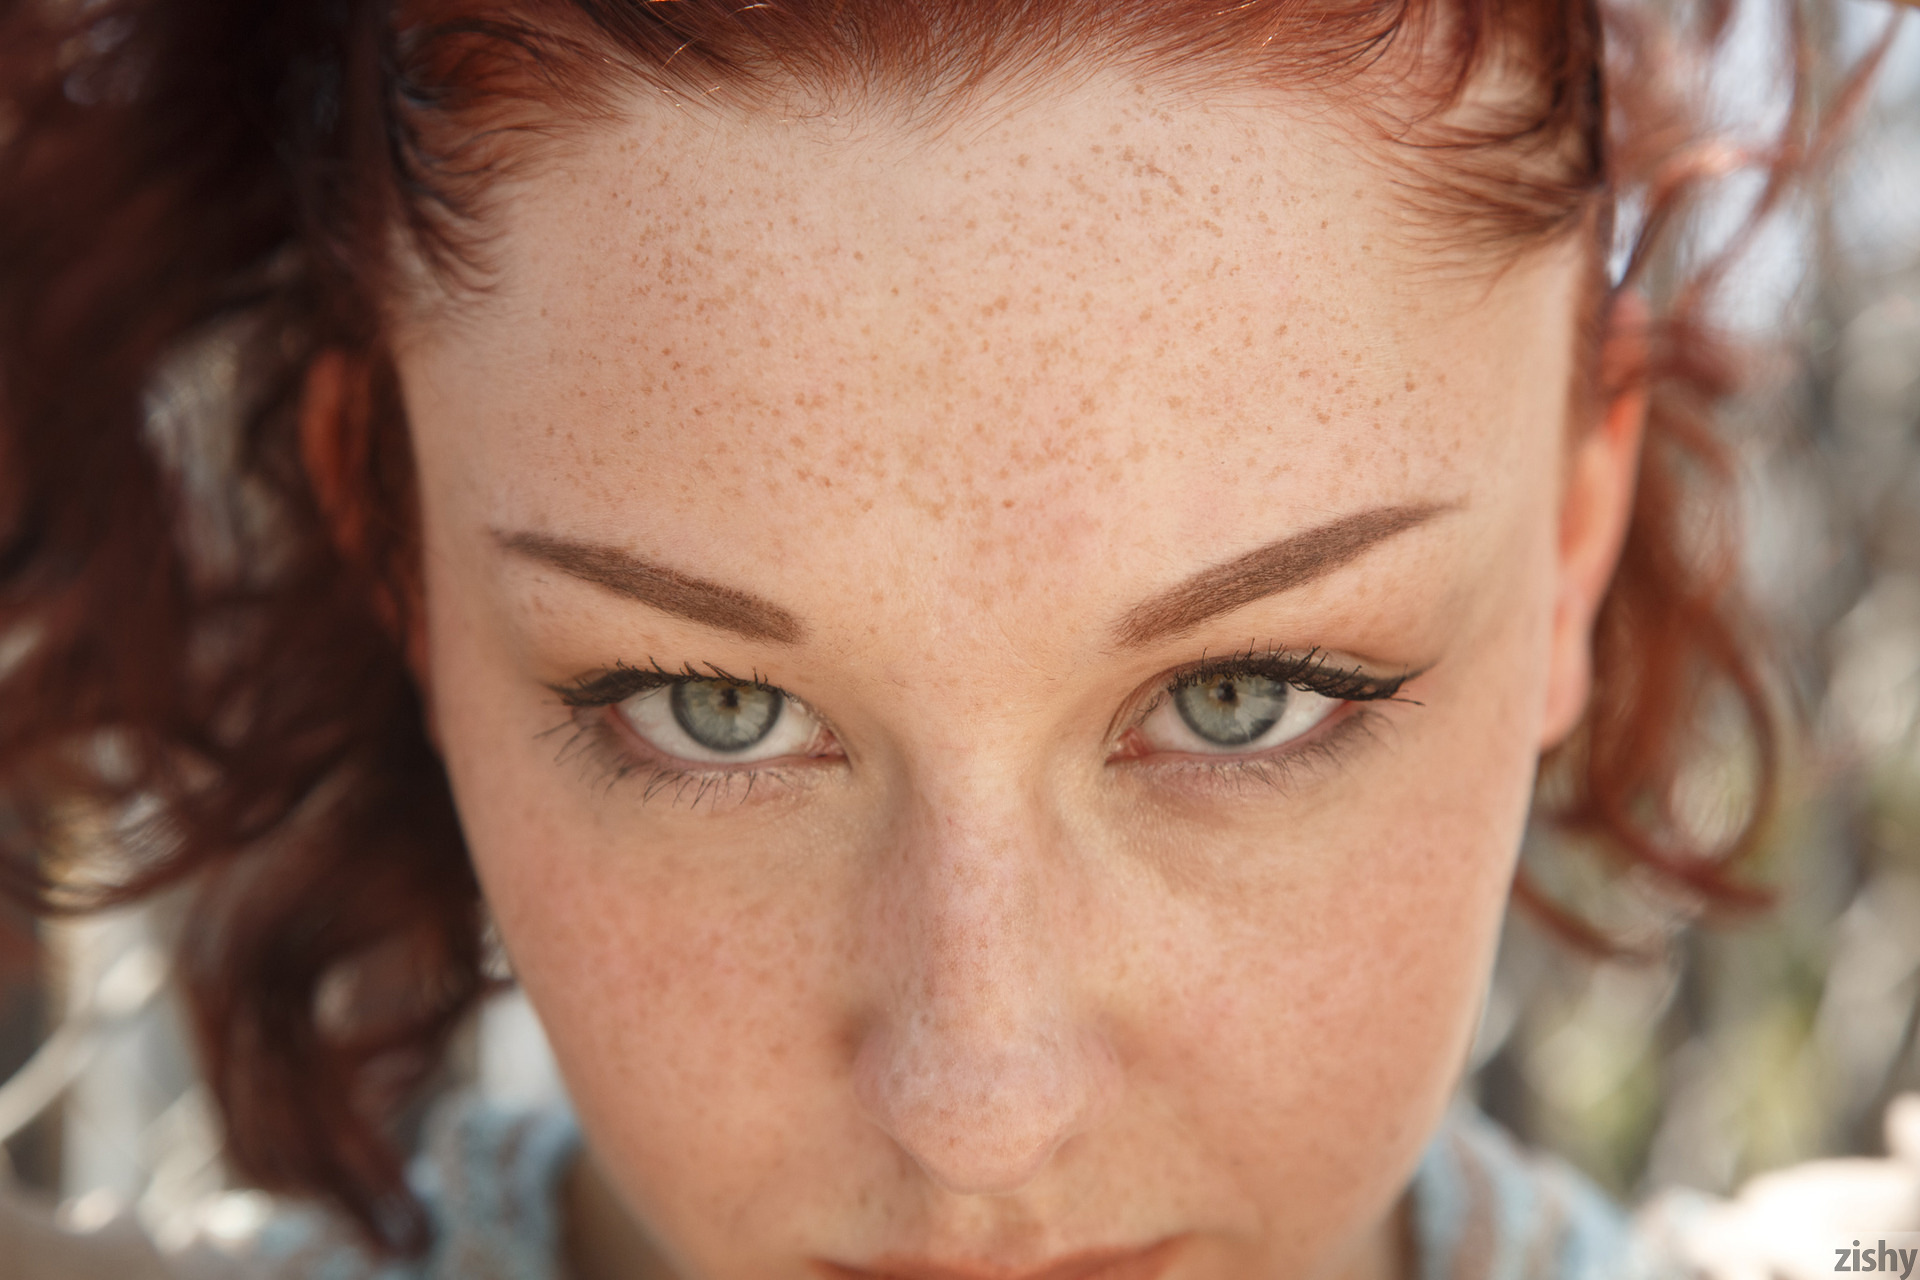 People 1920x1280 Spencer Bisson Zishy women face redhead blue eyes freckles closeup outdoors model